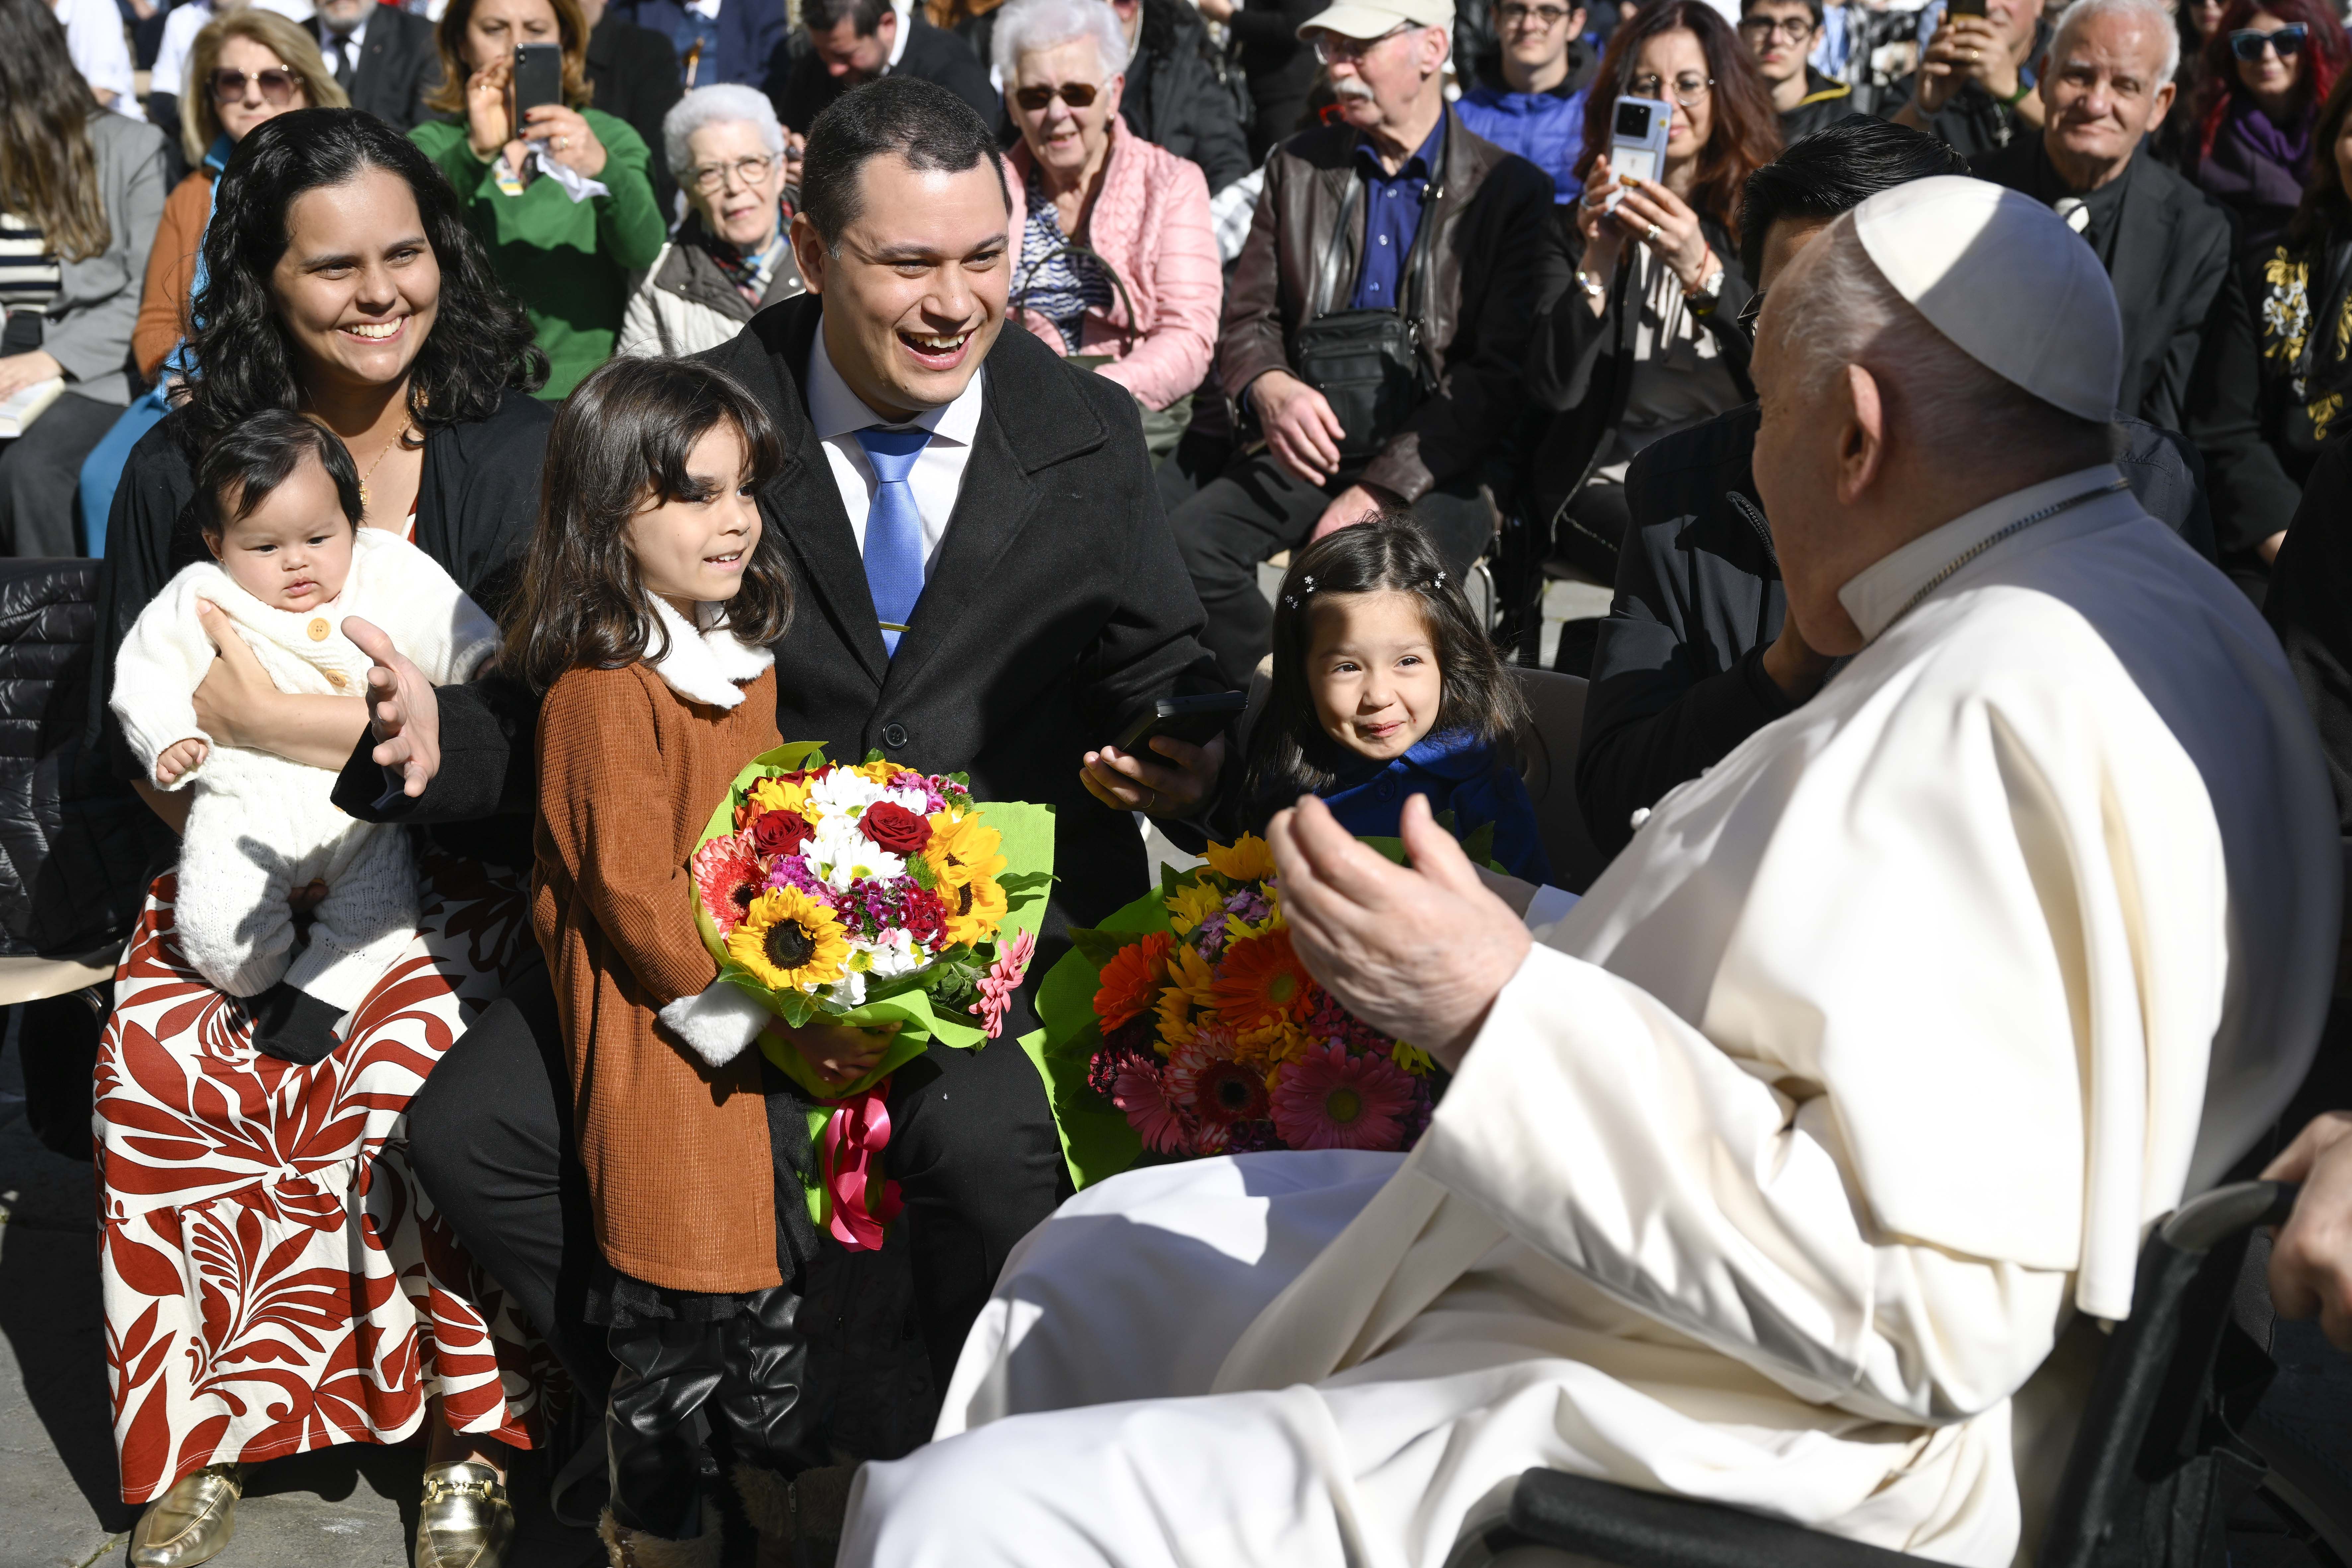 Pope Francis highlights importance of prudence, calls for end to war